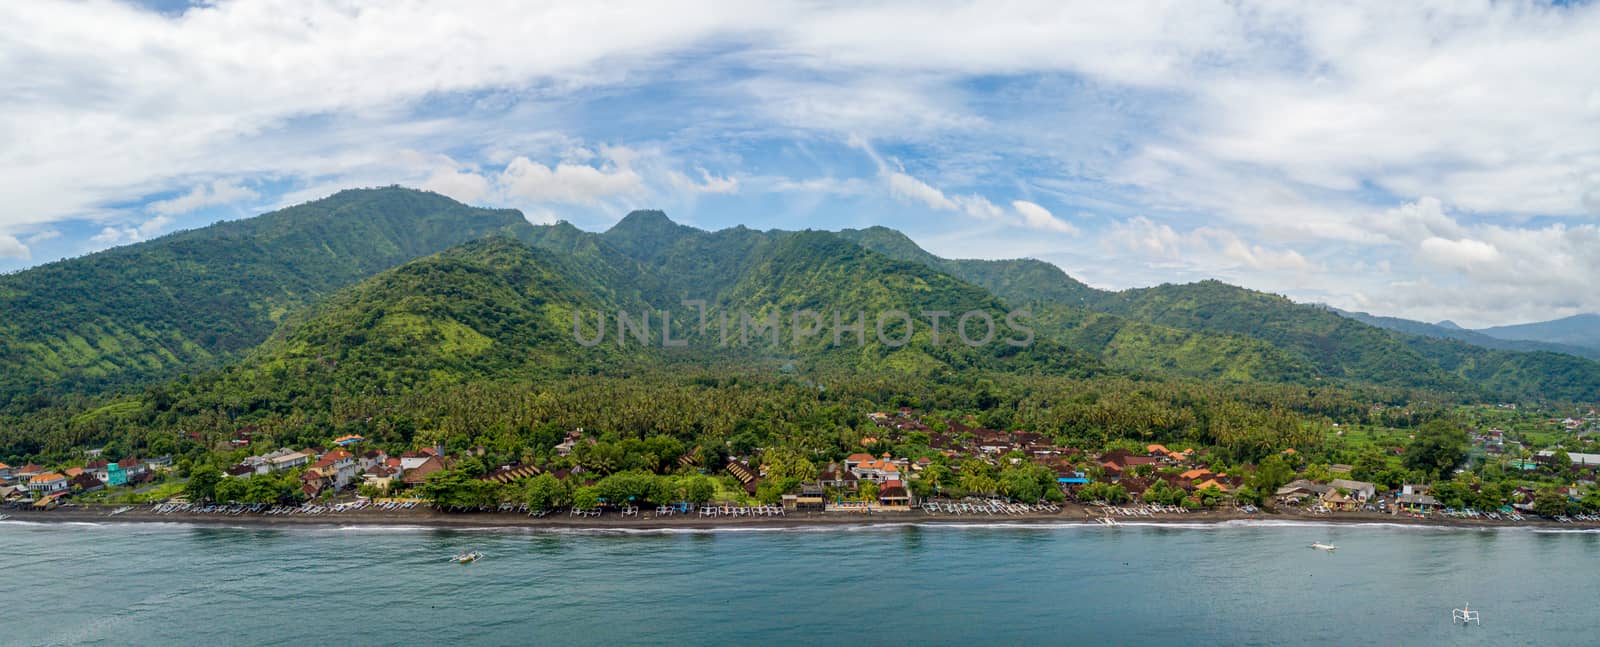 Panoramic aerial view of Amed beach in Bali, Indonesia. Traditional fishing boats called jukung on the black sand beach.